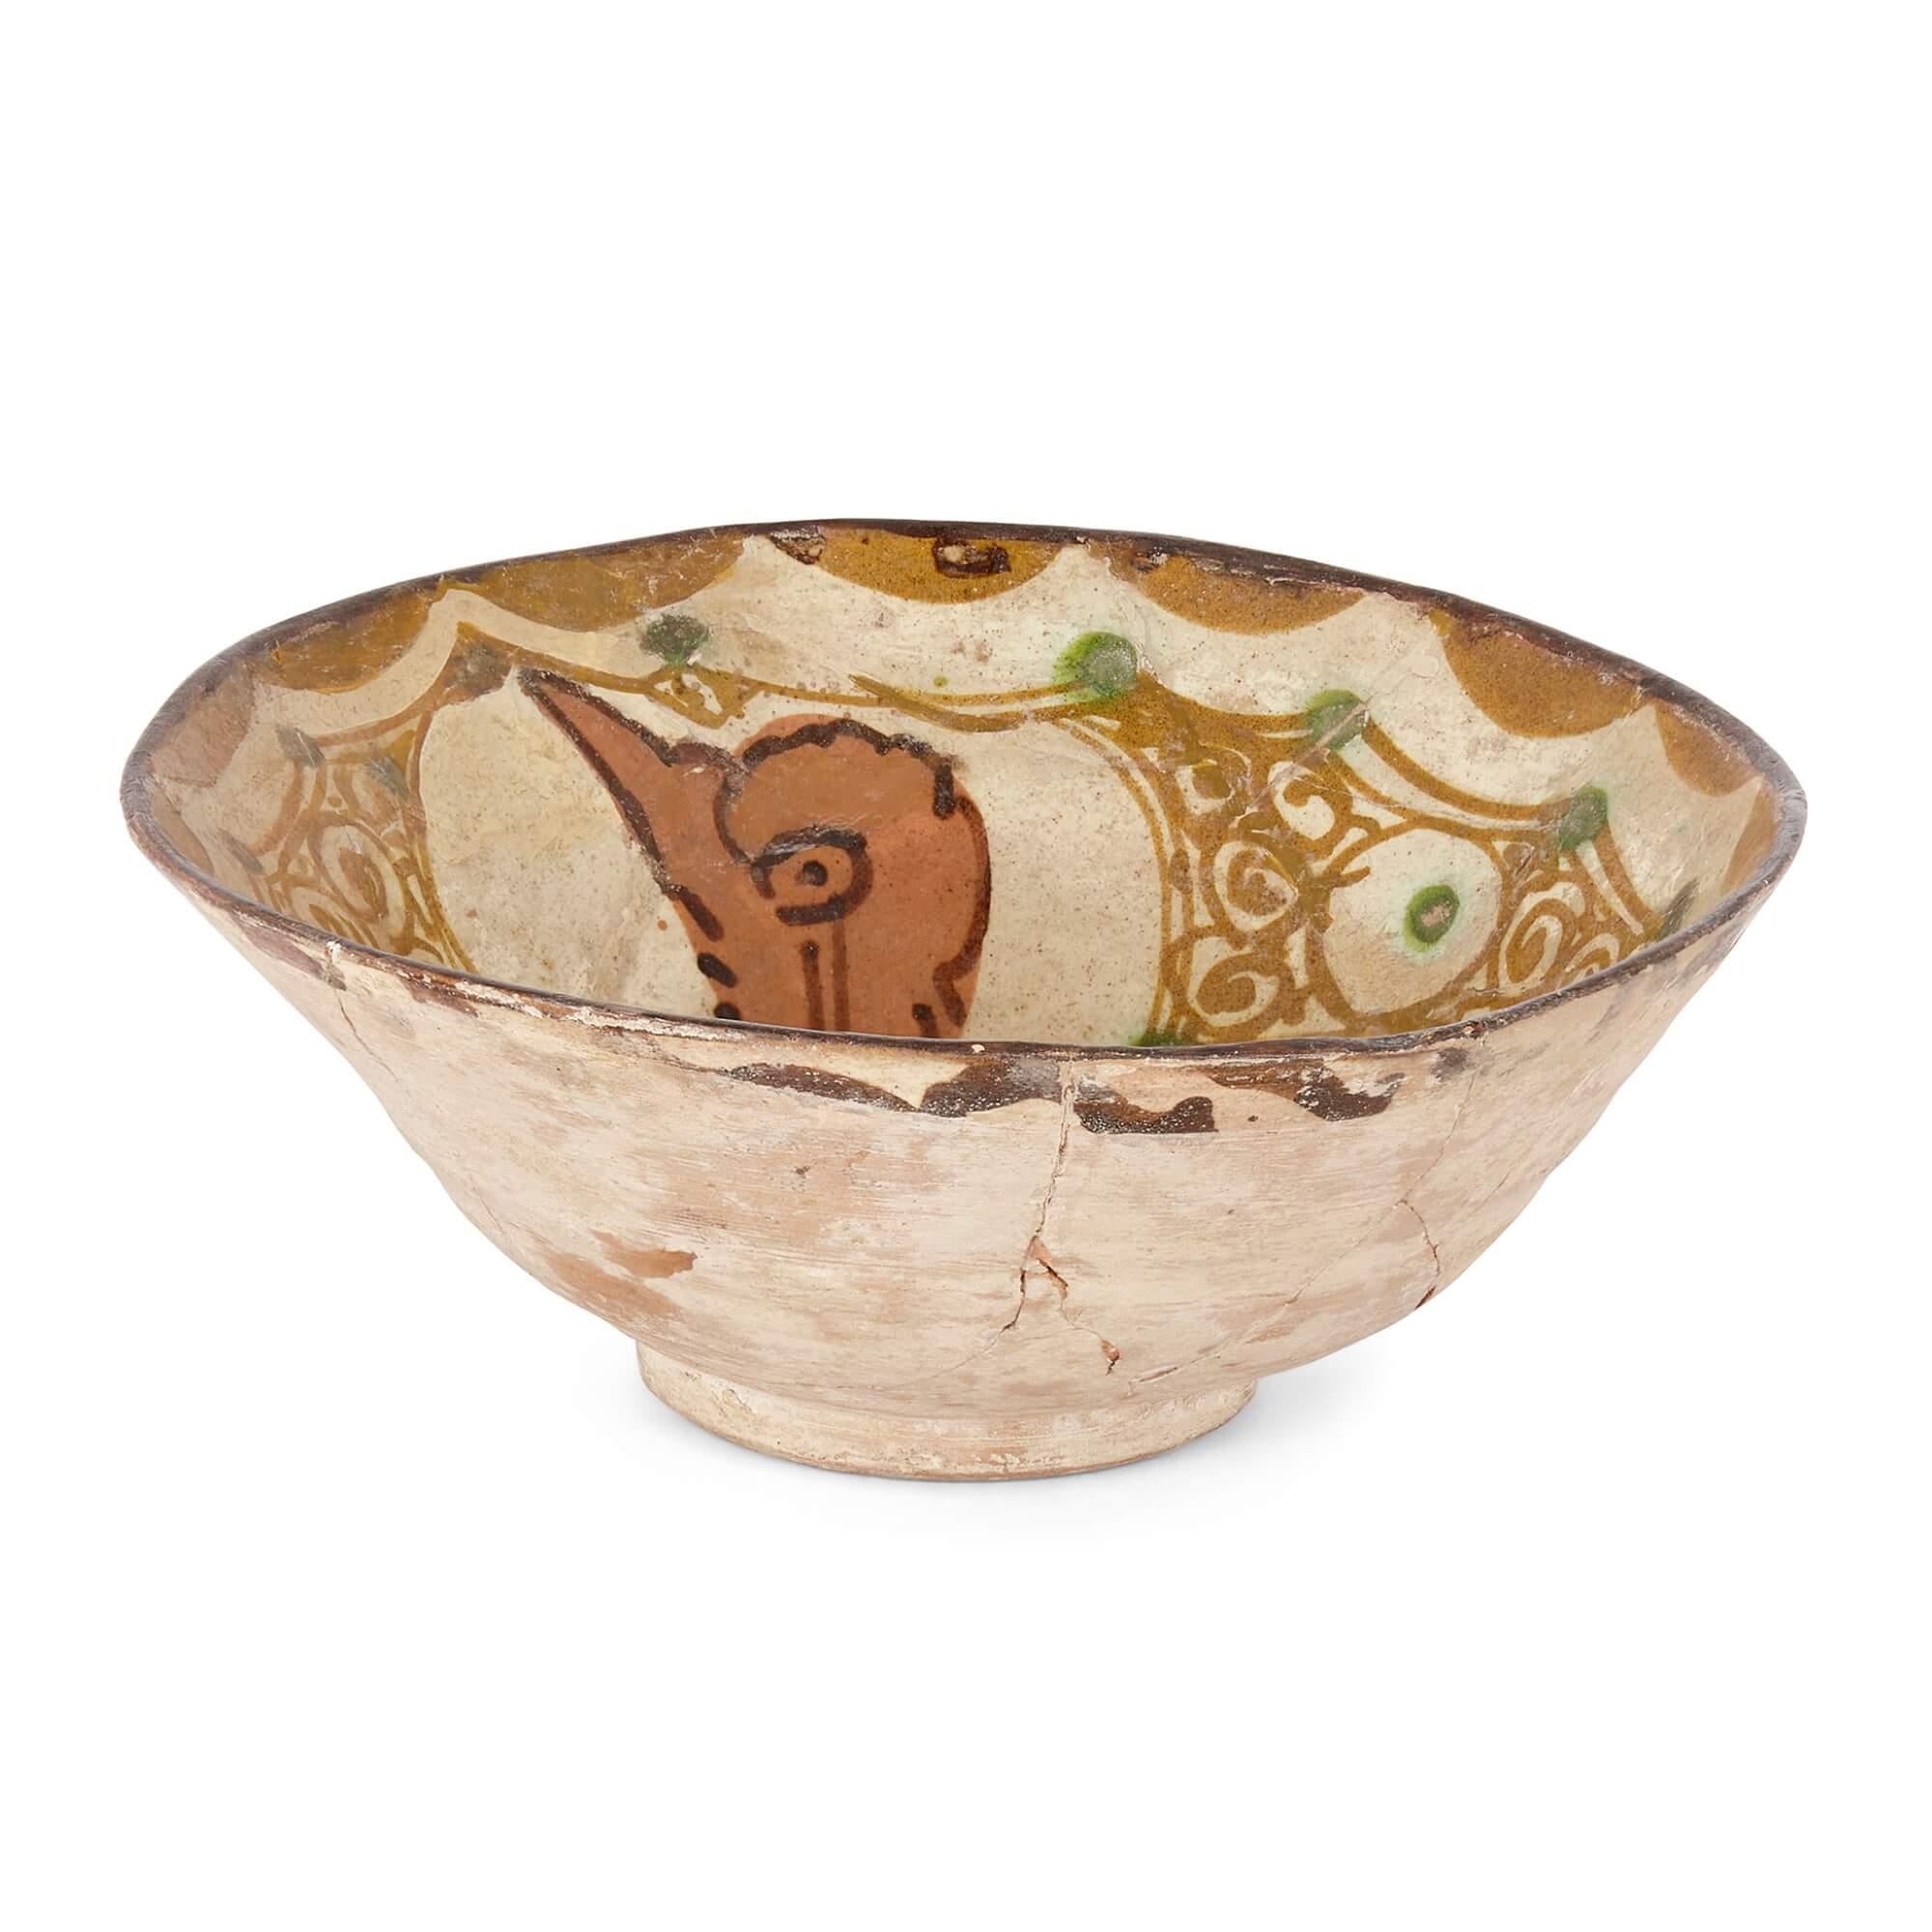 A fine kashan pottery ceramic bowl
Persian, 13th century
Measures: Height 7.5cm, diameter 19cm

Depicting a bird, this charming piece is an example of 13th century Persian Kashan pottery. Kashan was one of a number of historic pottery production